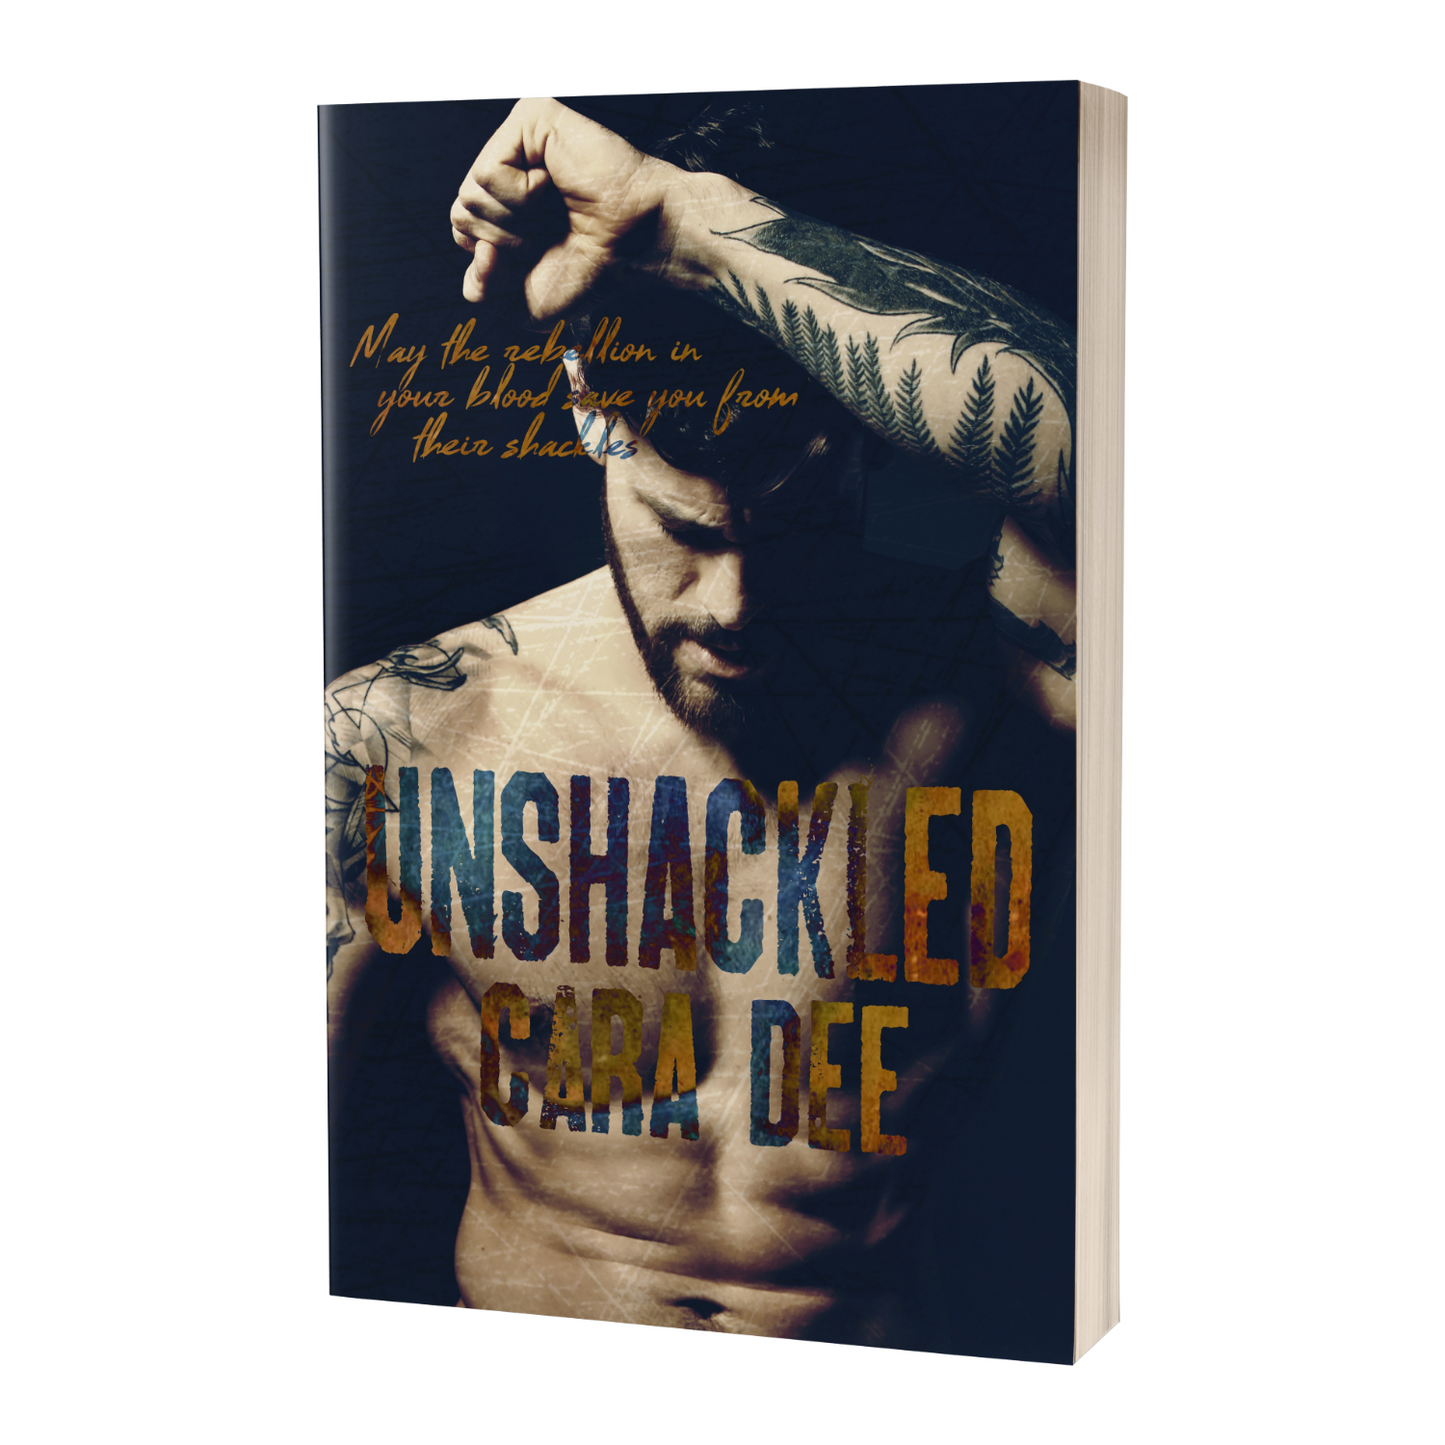 The Irish of Philly, #3 - Unshackled (Standalone)